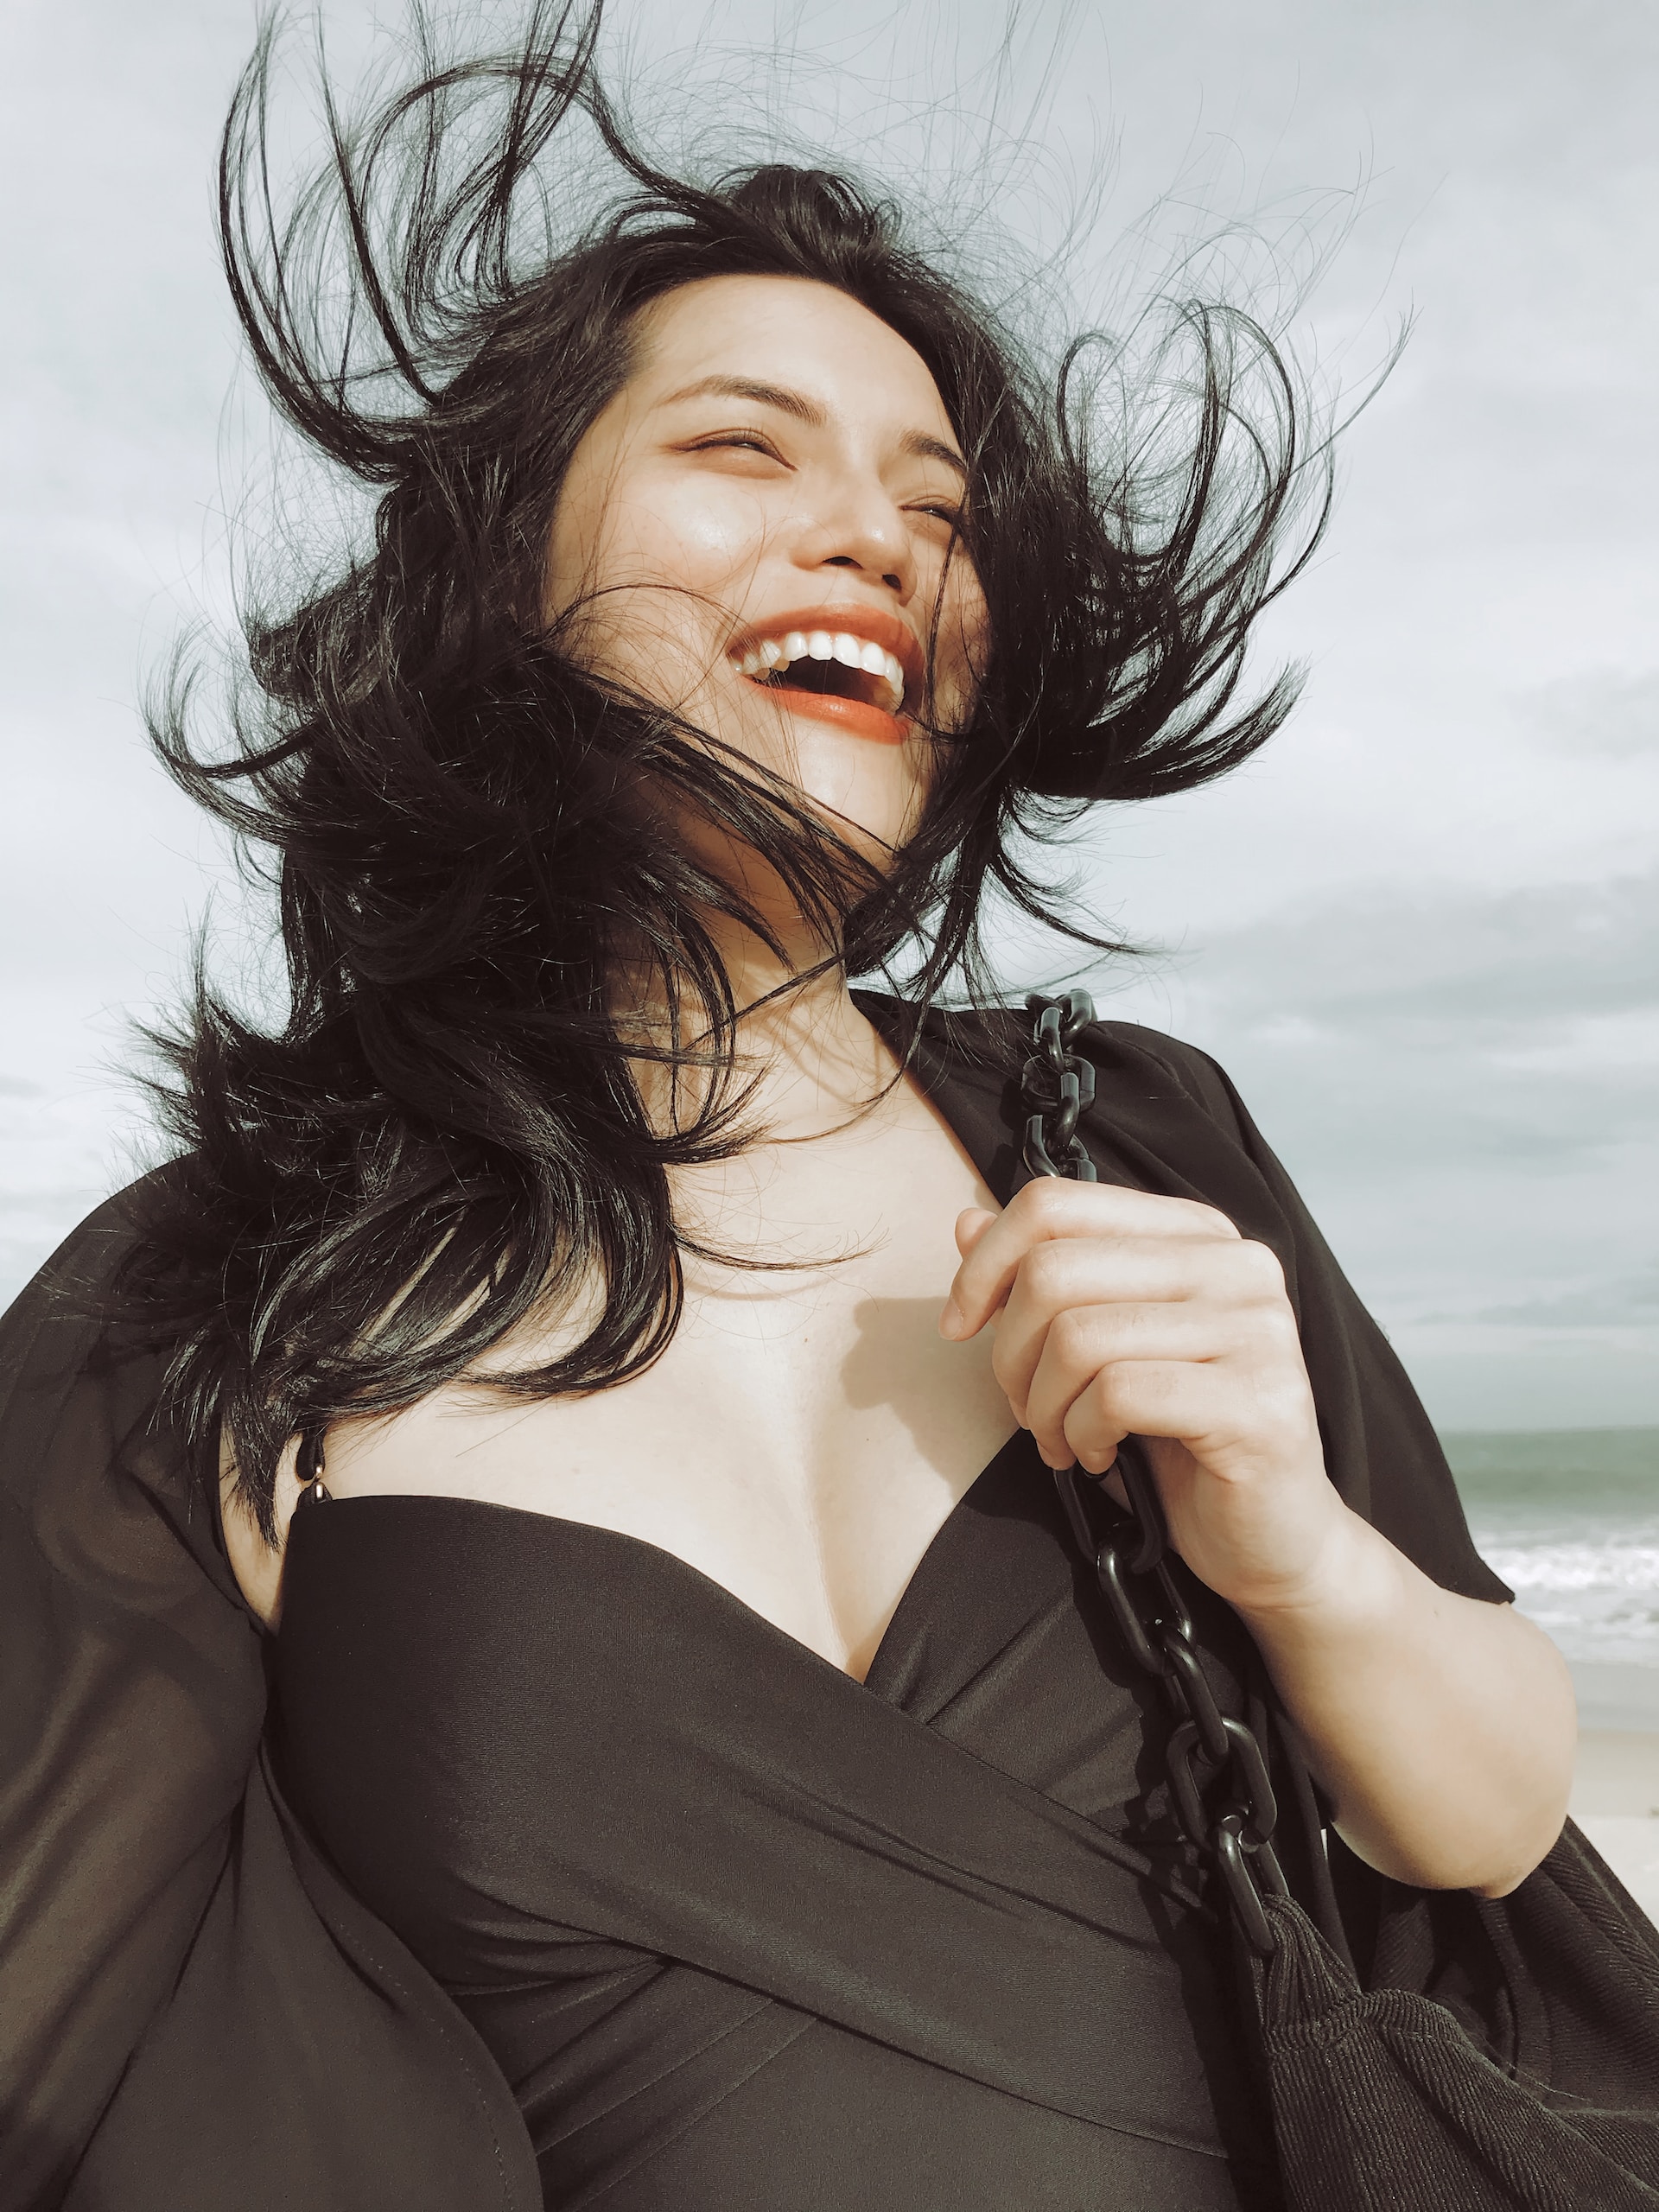 woman in black outfit smiling and laughing as wind blows through her hair